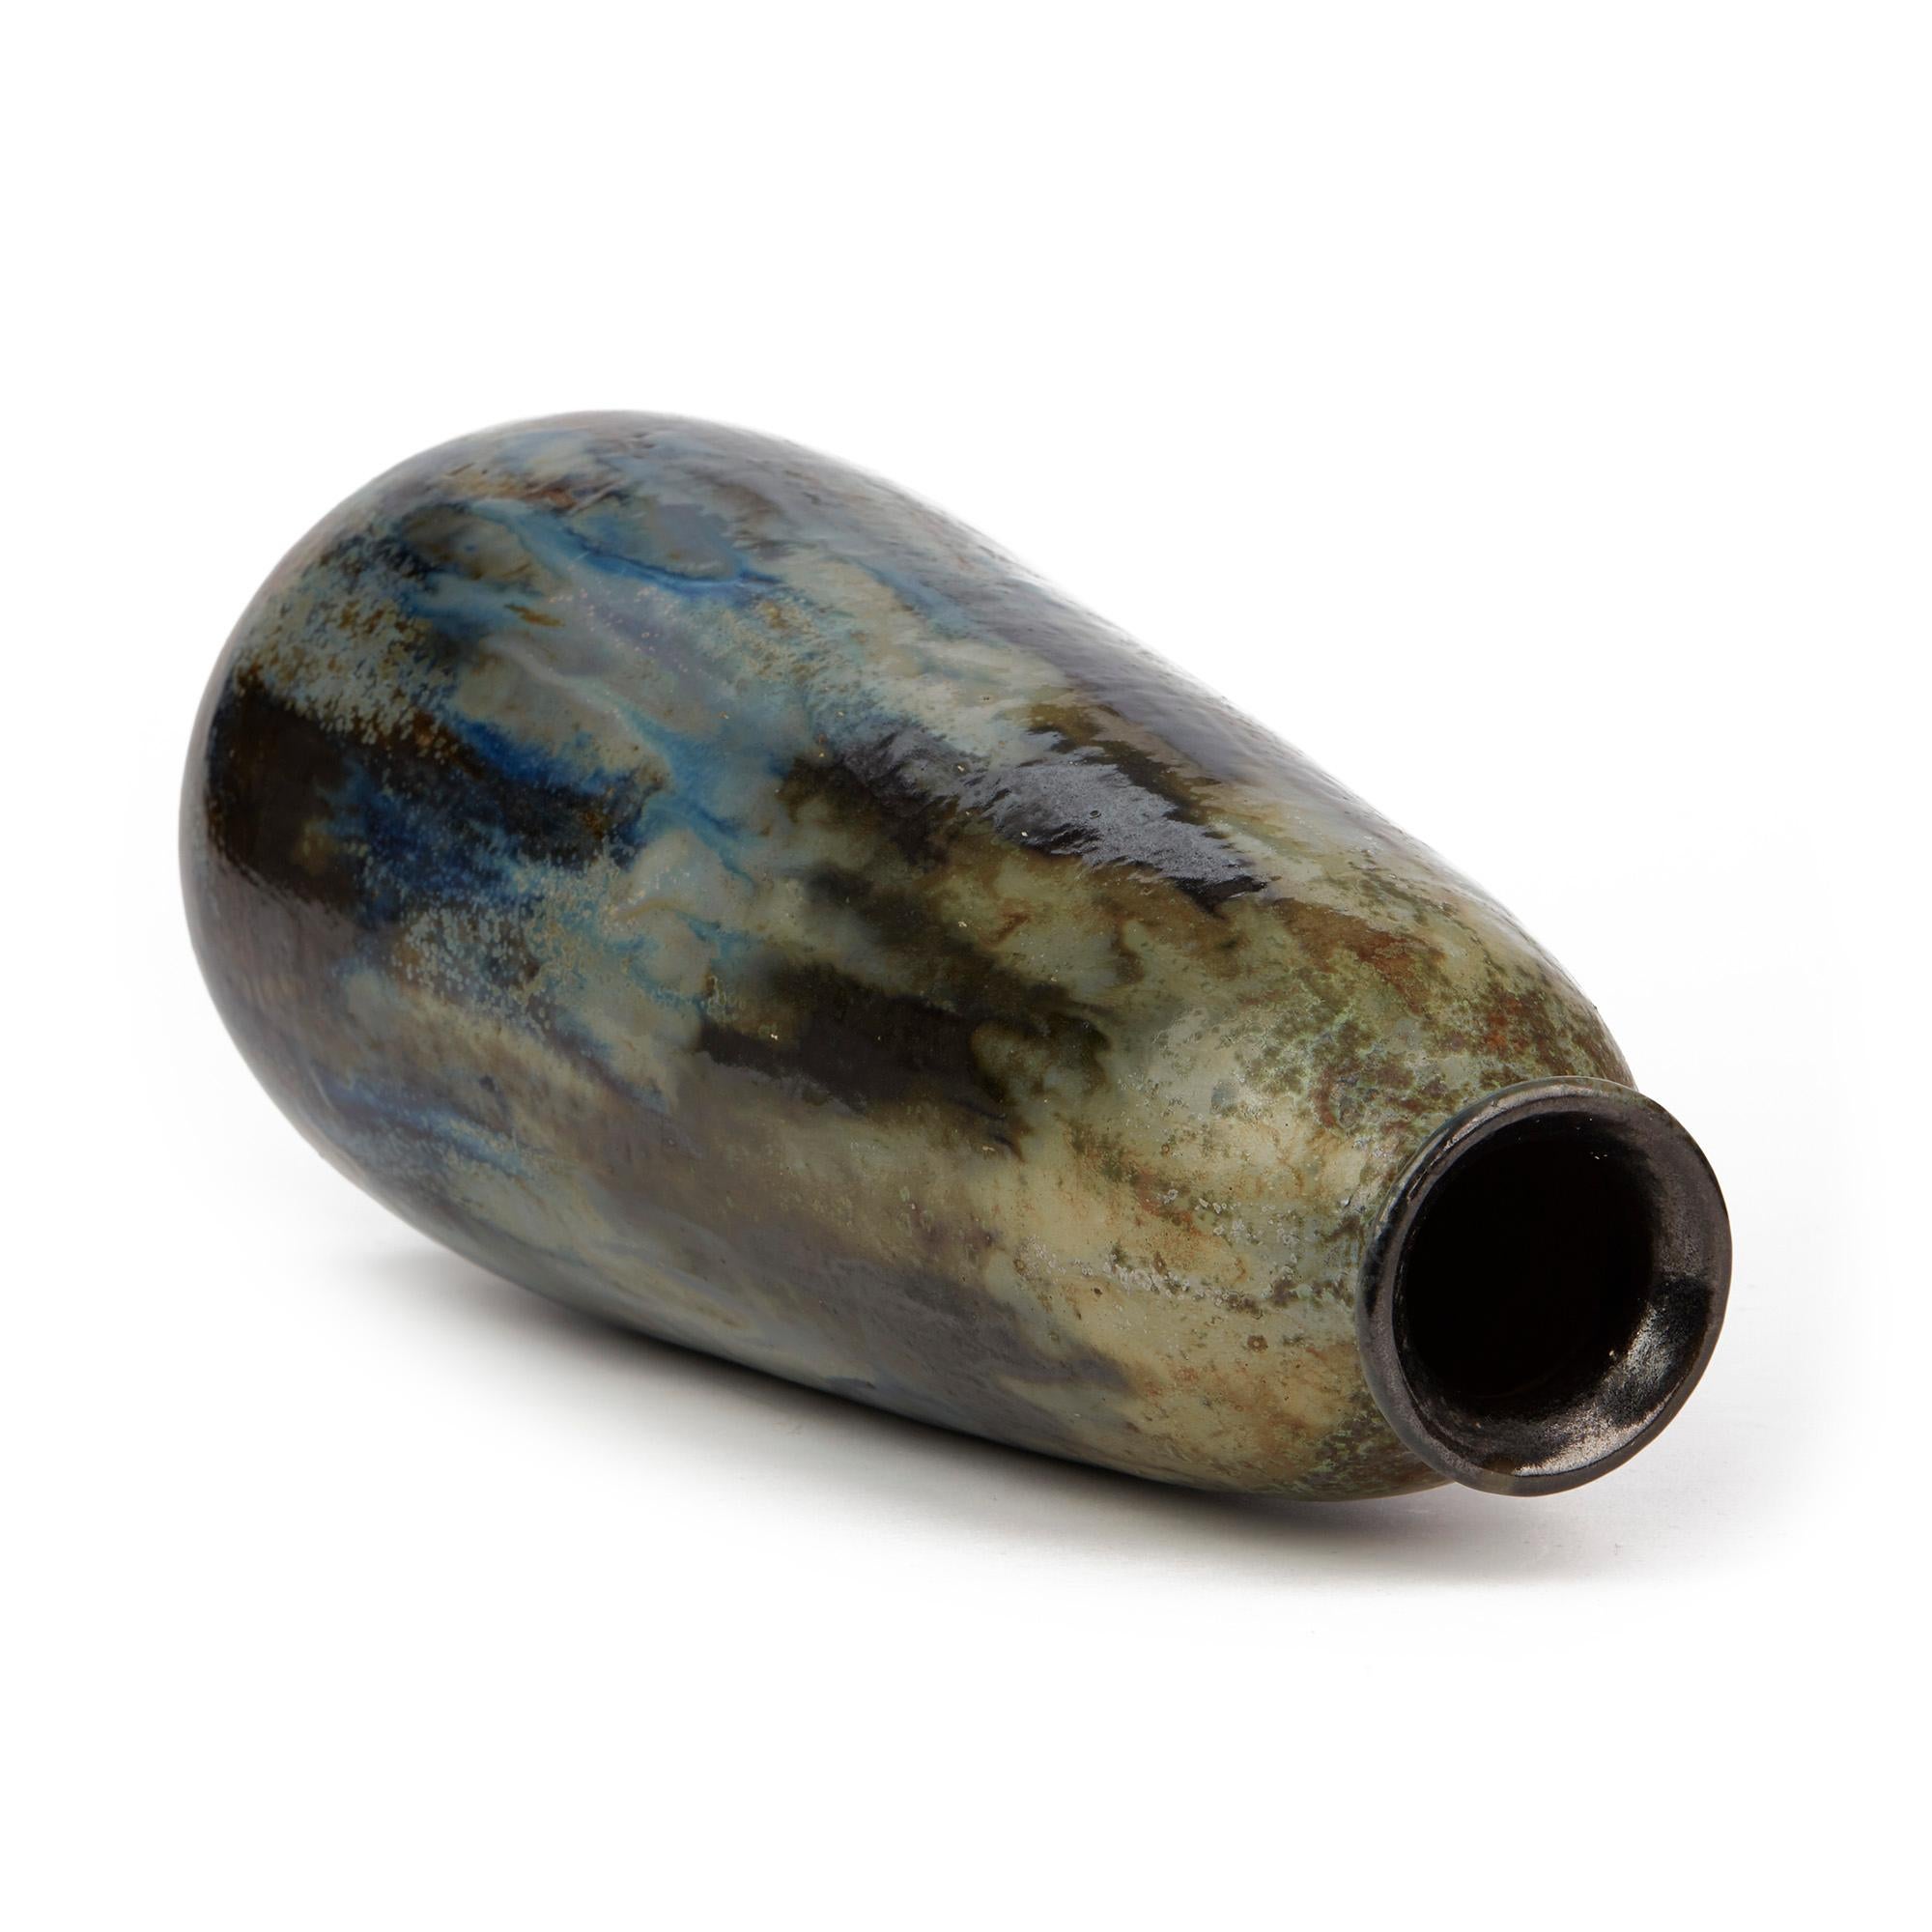 French Roger Guérin Bouffioulx Exquisitely Glazed Tall Stoneware Art Vase, circa 1930 For Sale